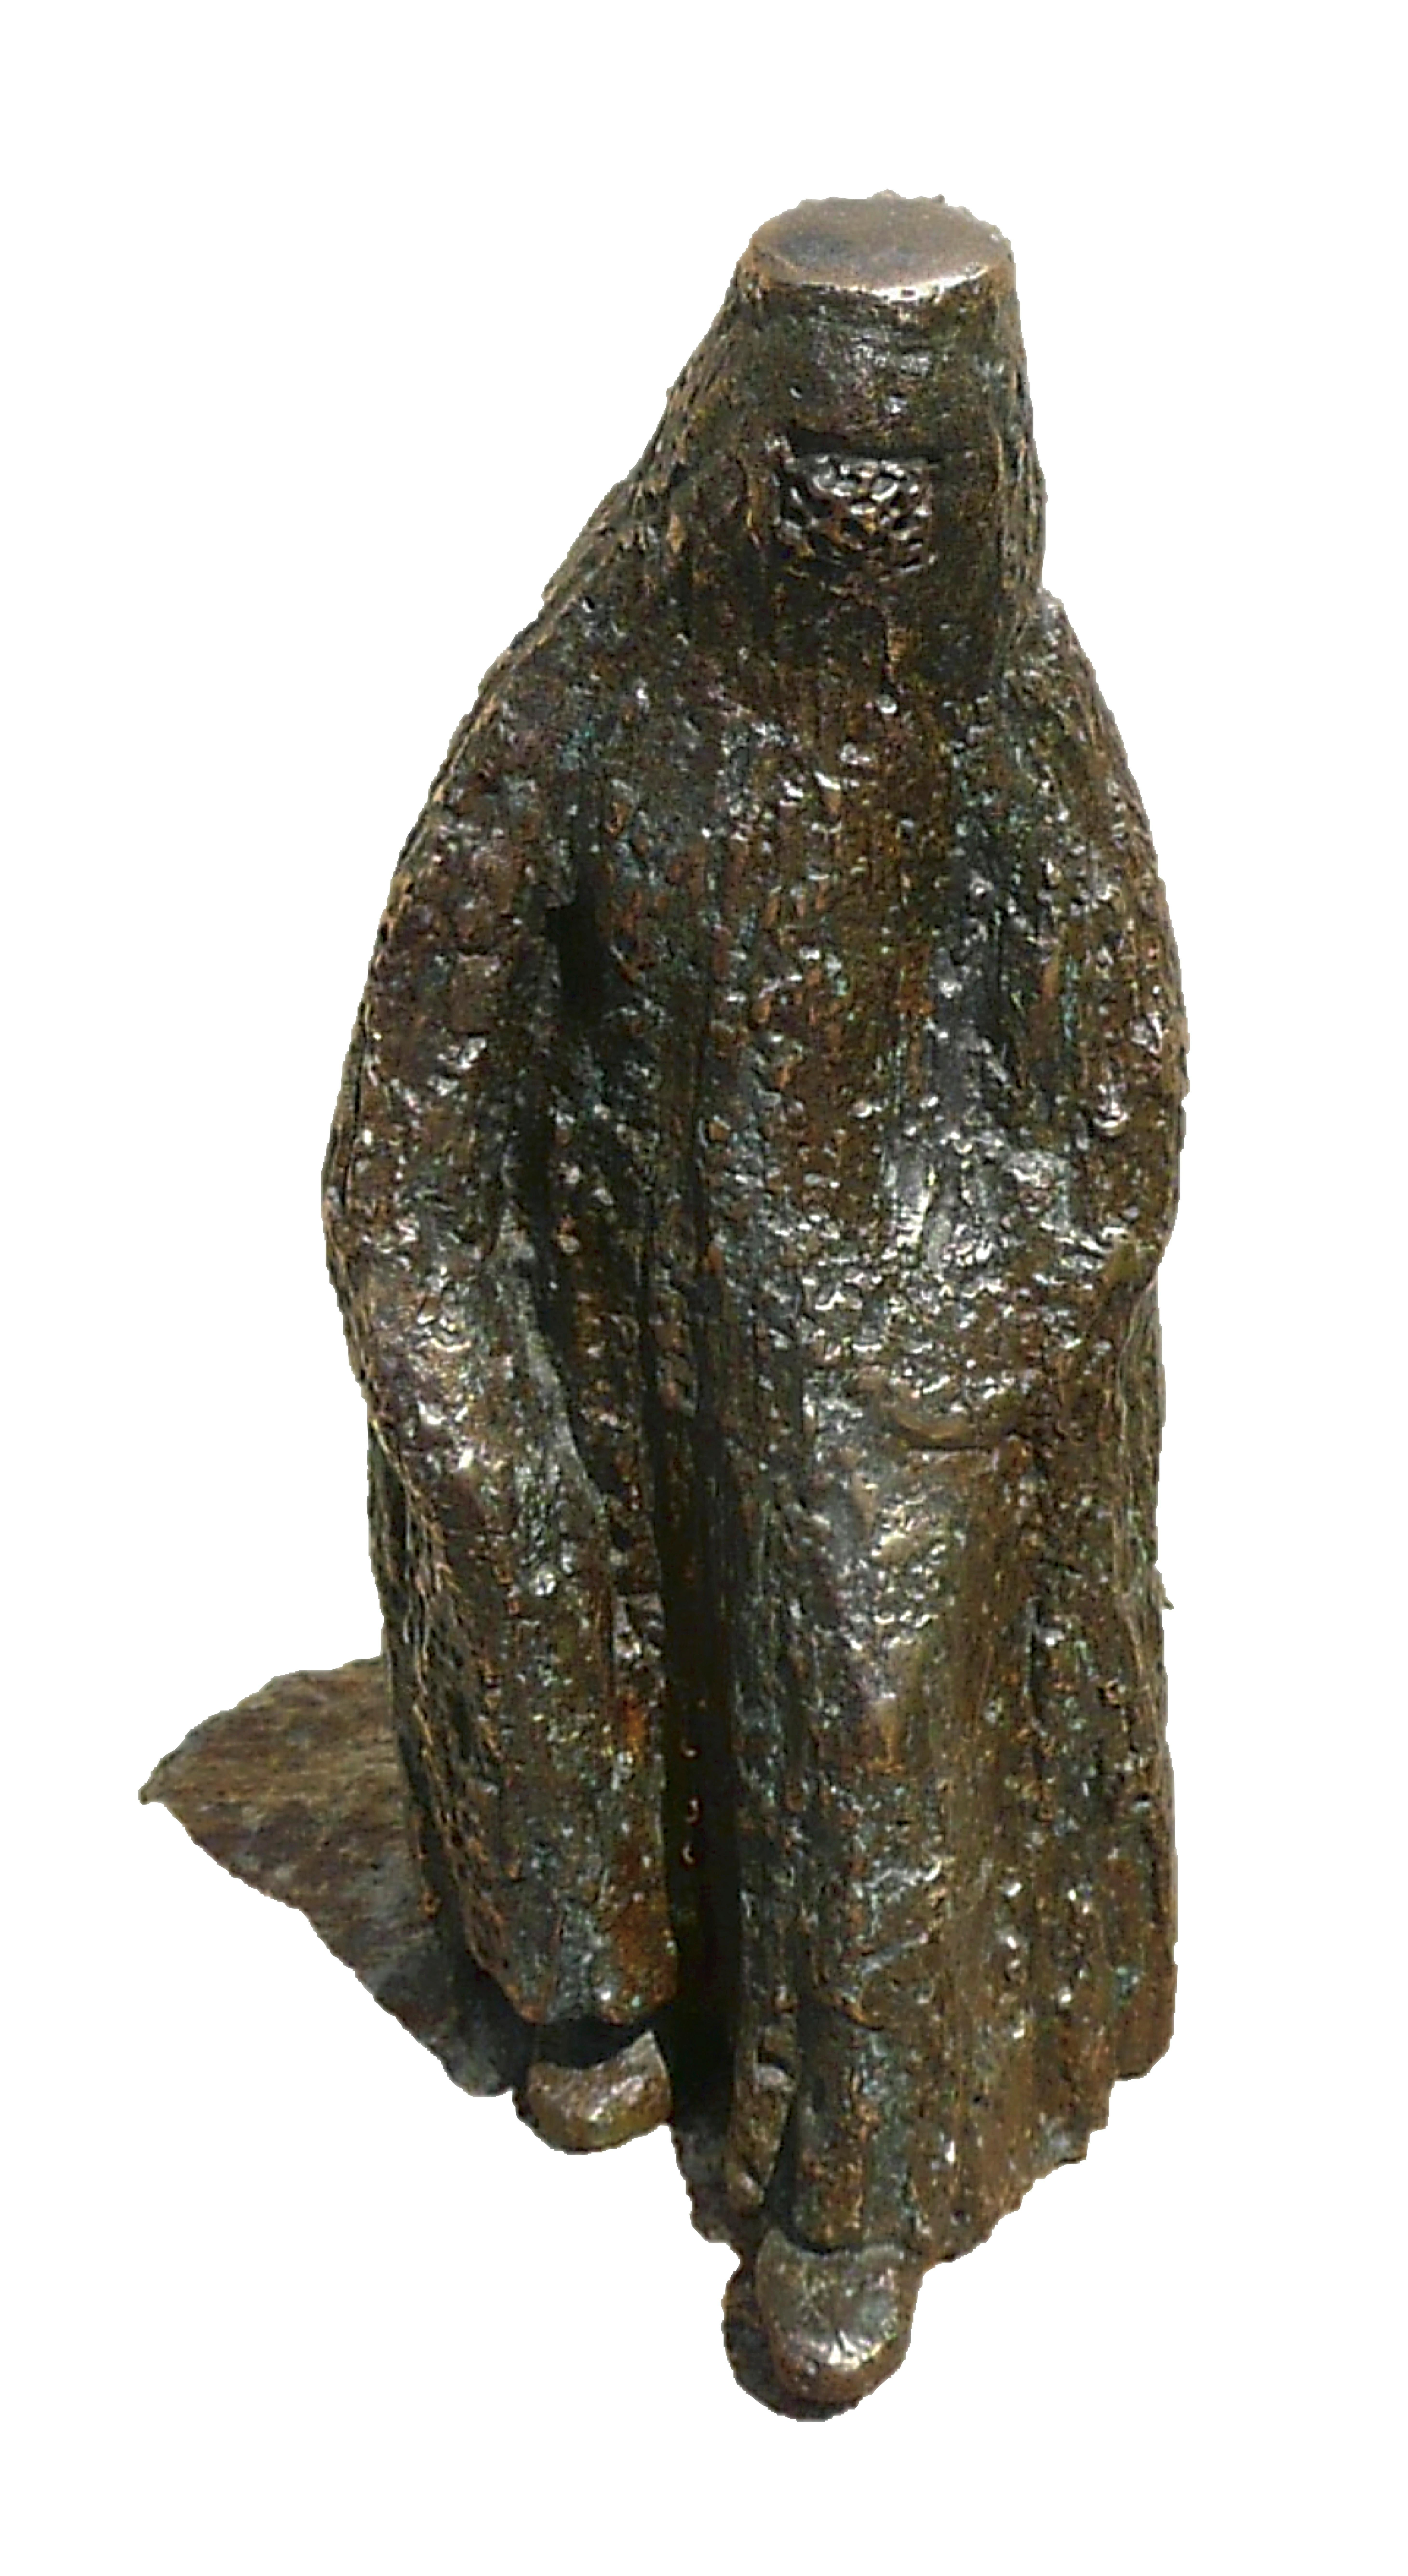 "Afghane" bronze figurative sculpture numbered from 2 to 8 19x9x7cm 2009